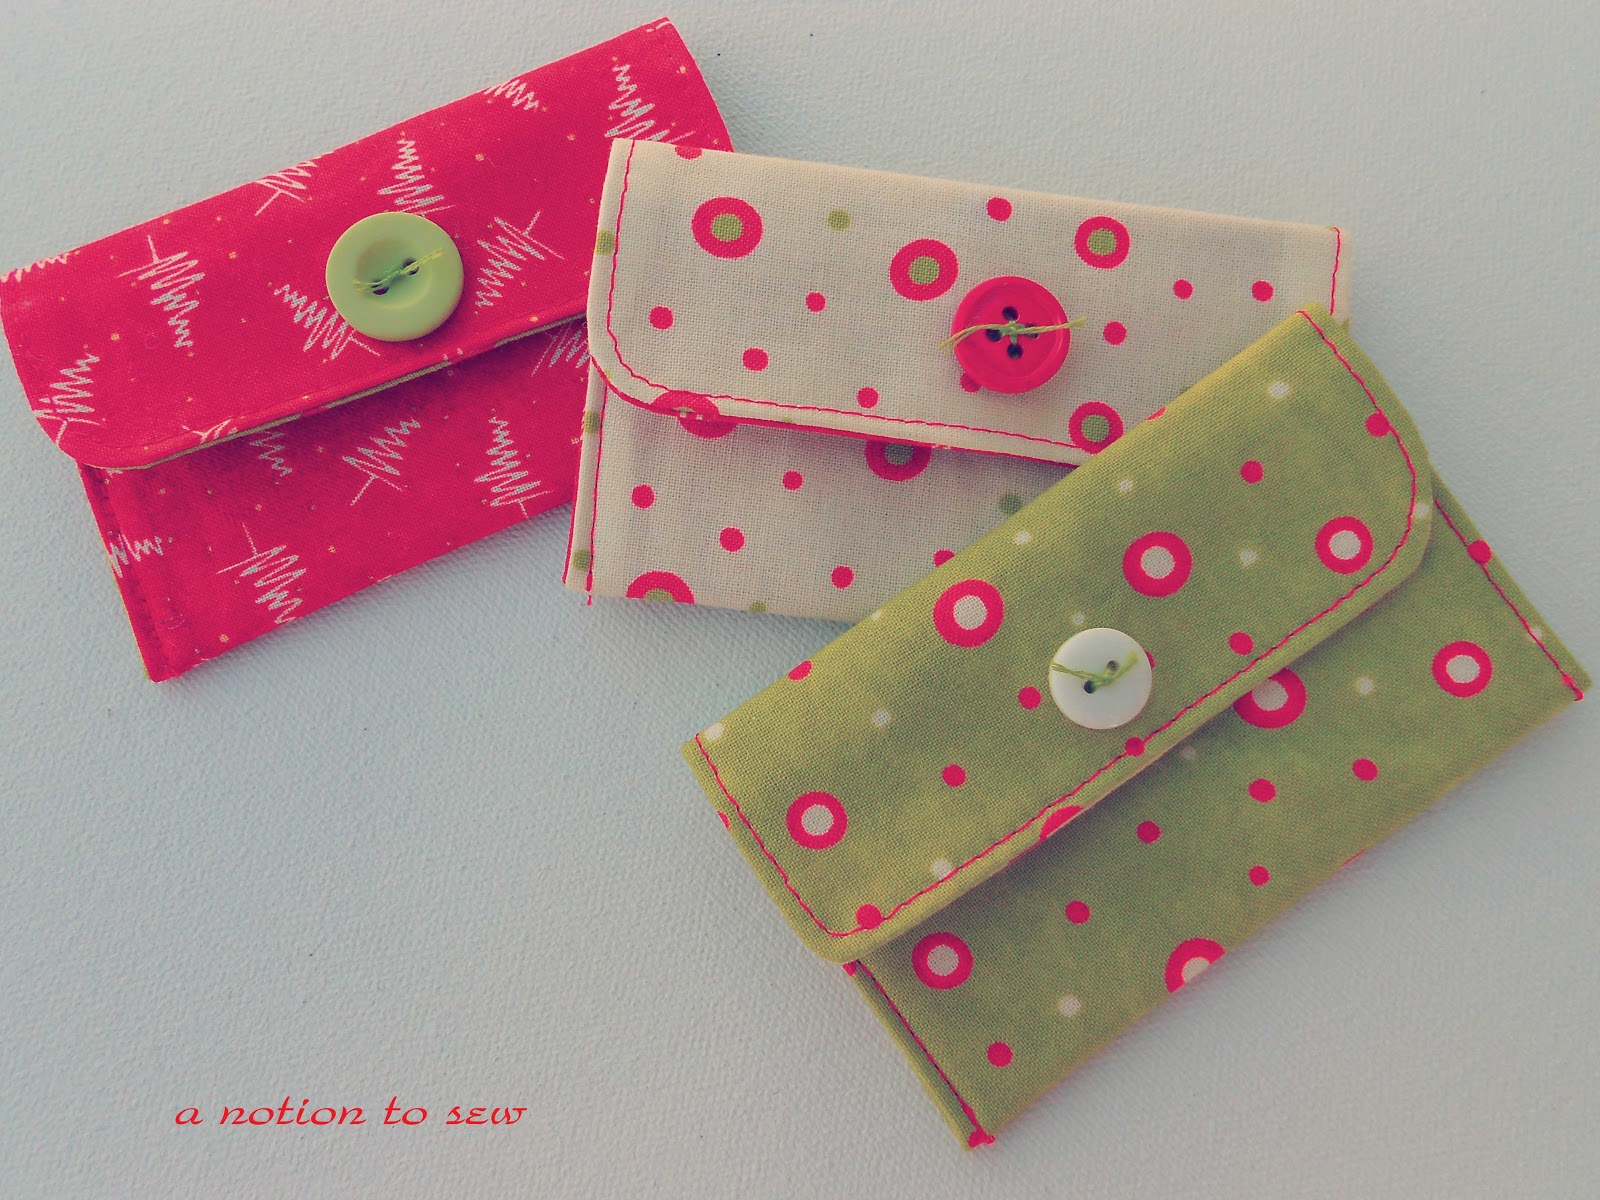 diy-gift-card-holder-tutorial-sewing-projects-gift-card-holder-diy